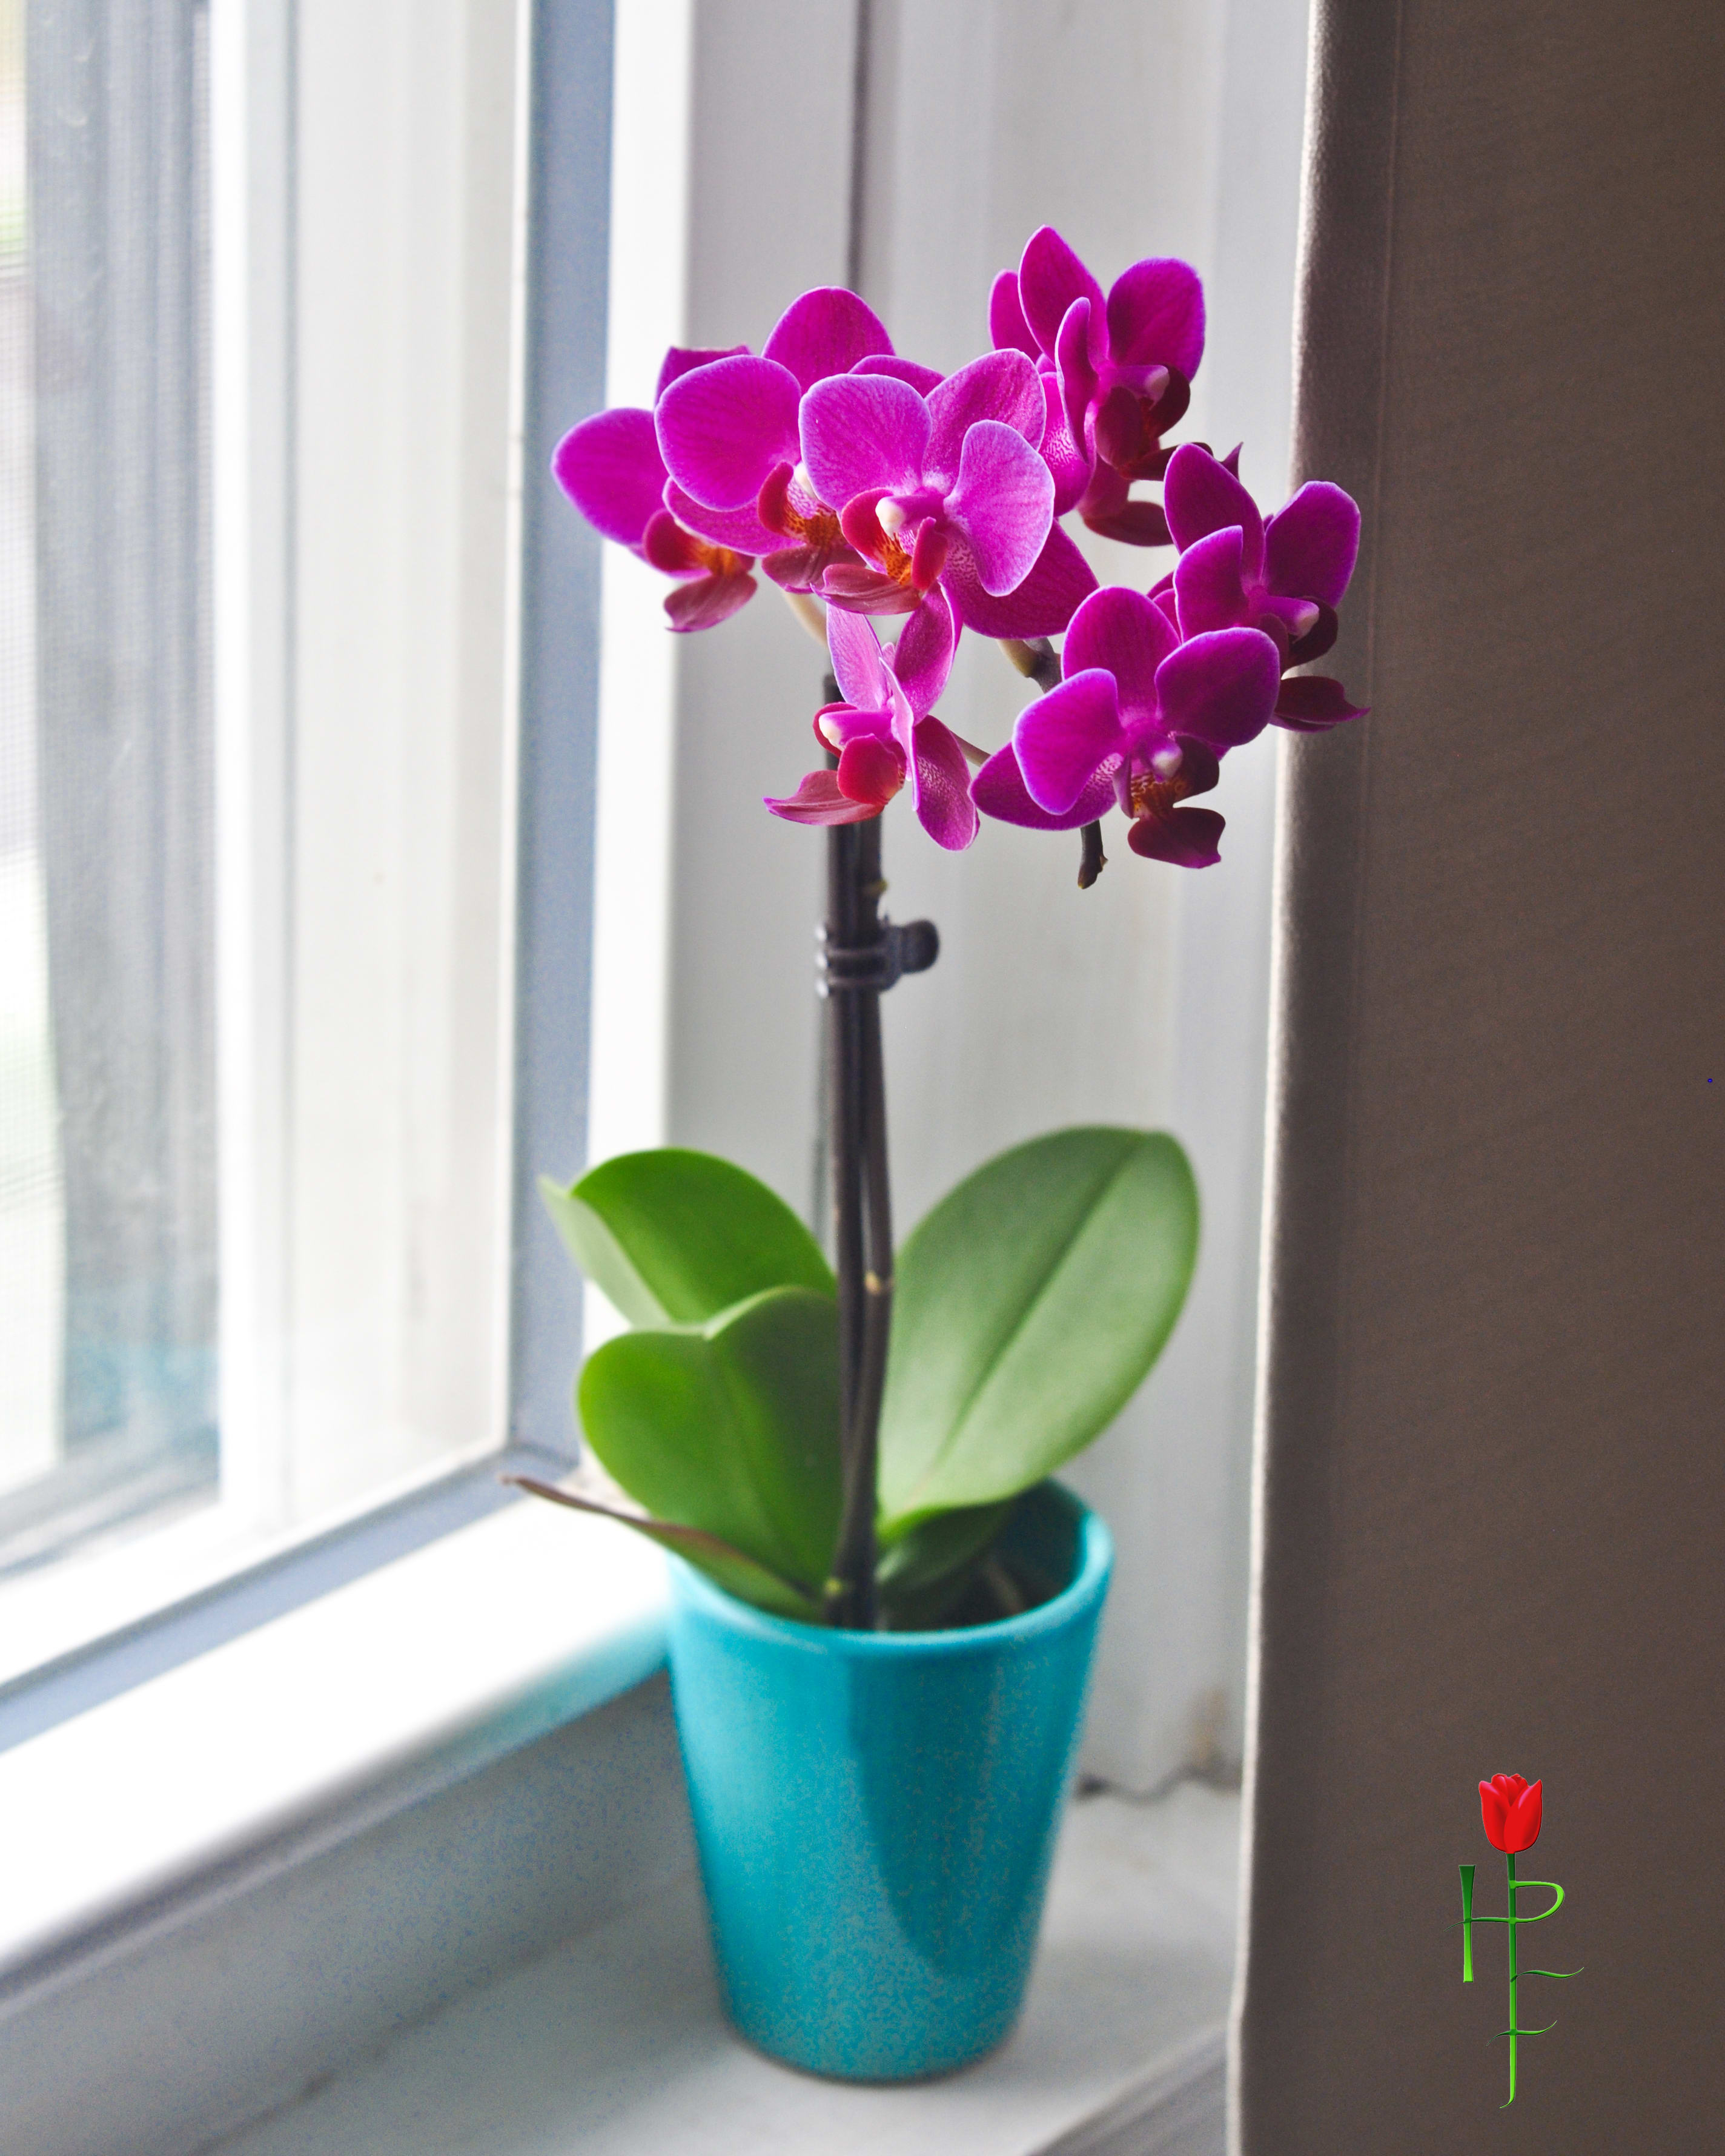  Potted Orchid - Potted Orchid that may consist of purple, white, or white/purple colors